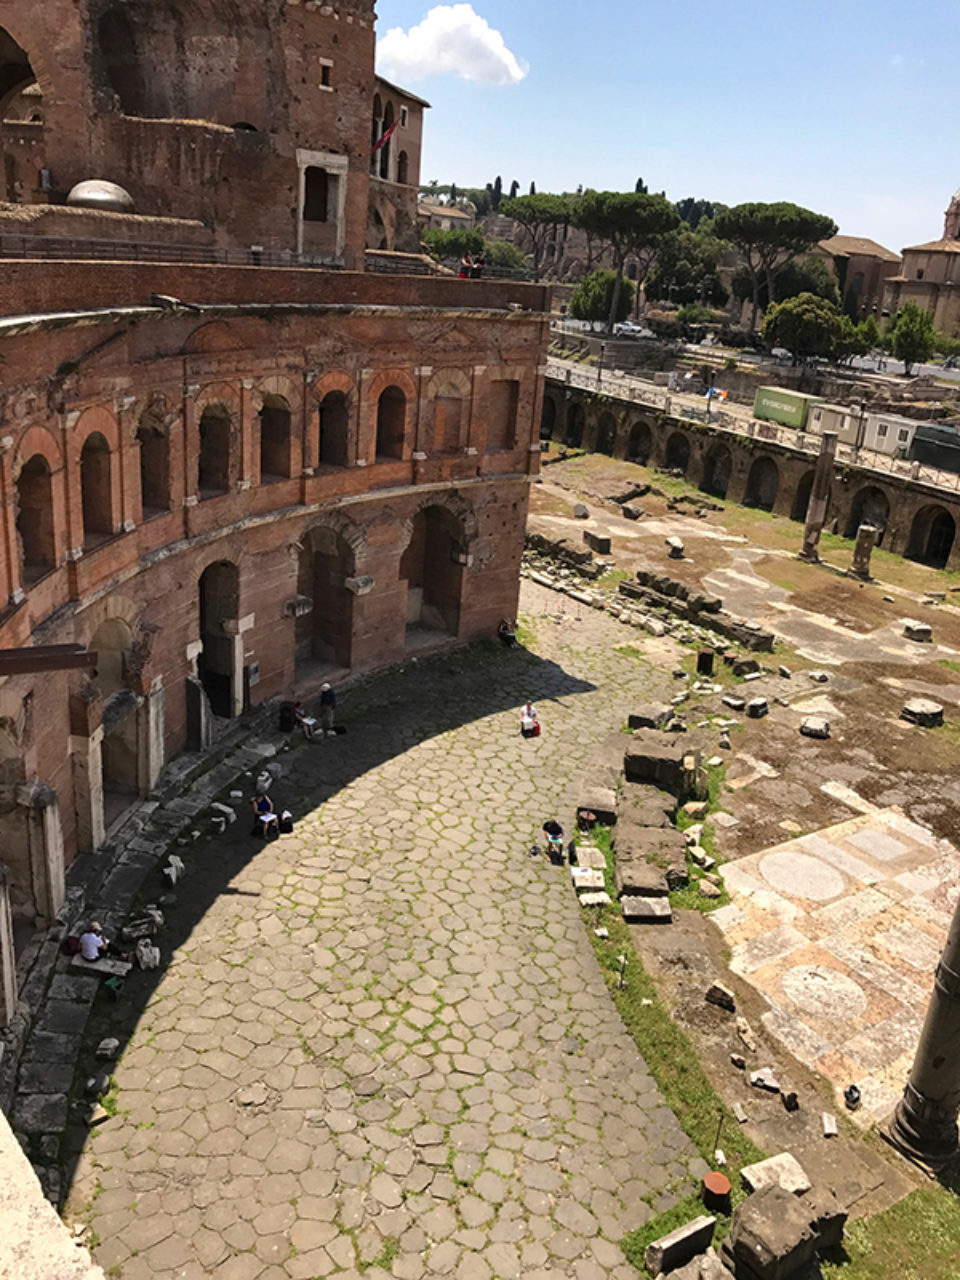 View from Trajan's Market